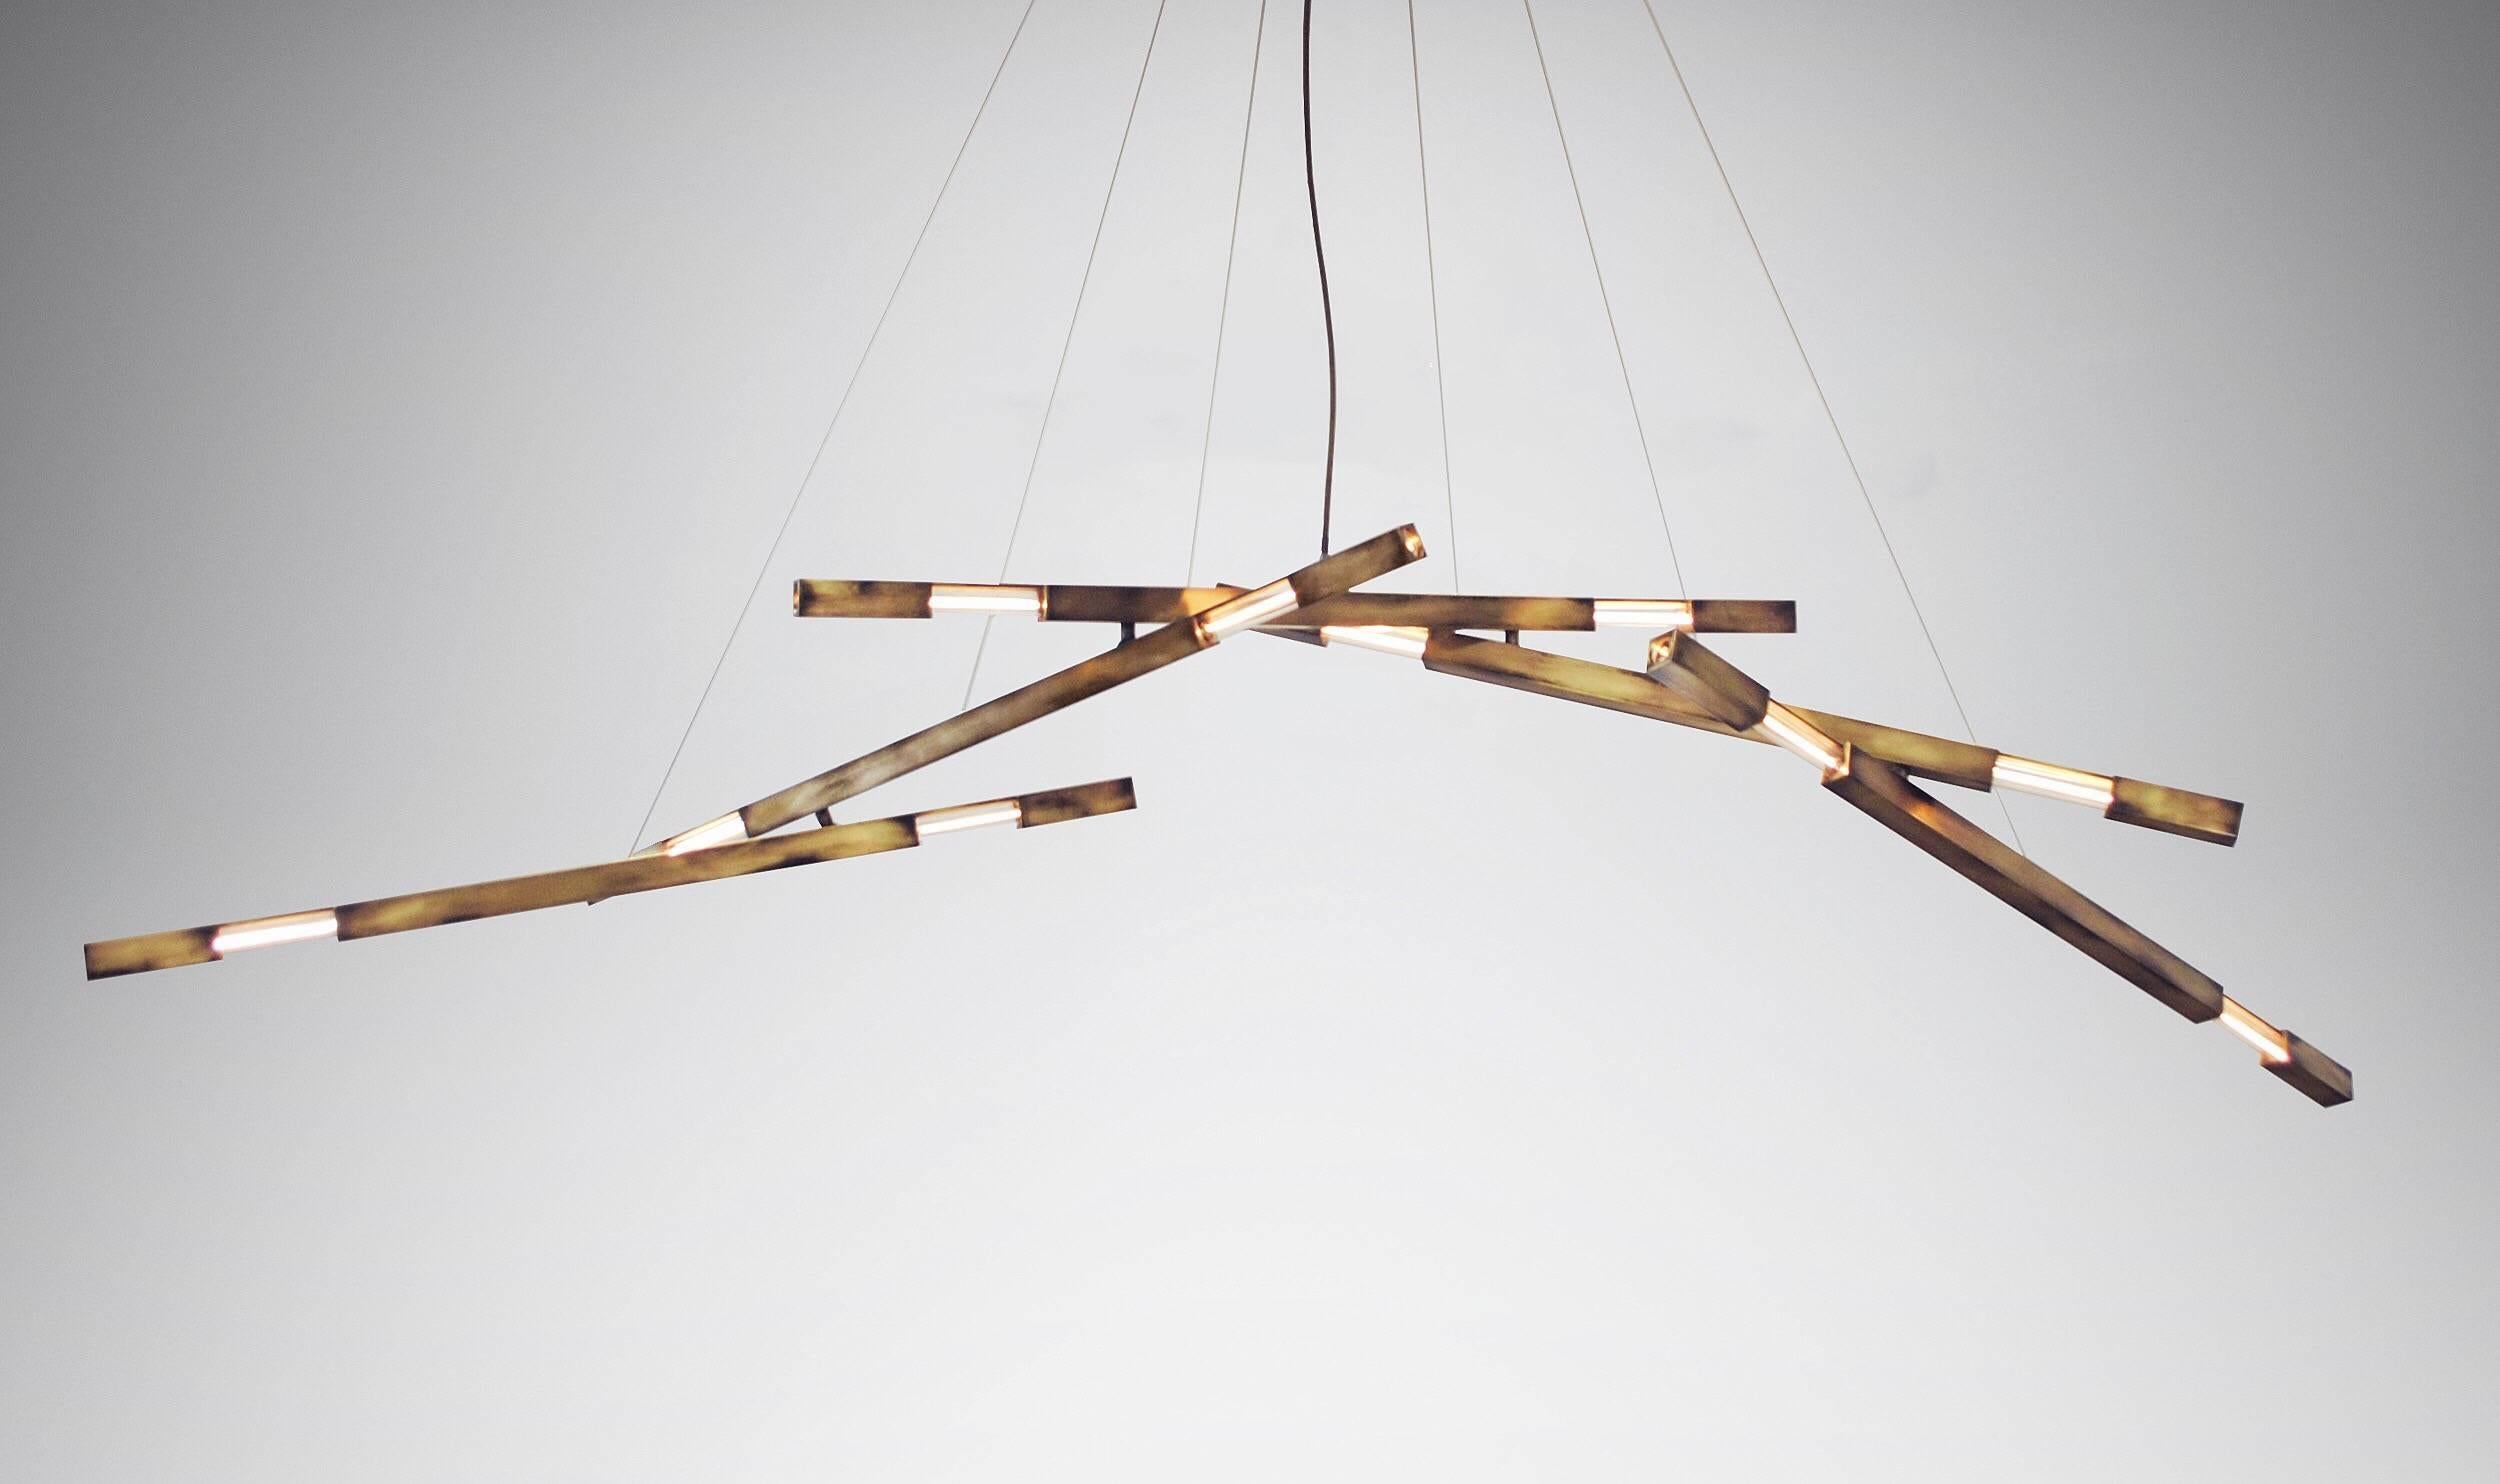 Grand Dynamic Stilk Chandelier  Daikon

material options: steel, brass, stainless steel

The Grand Daikon Stilk Chandelier features a quintet (5) of illuminated branches. Each branch is connected using dynamic swivel mounts. The dynamic swivel